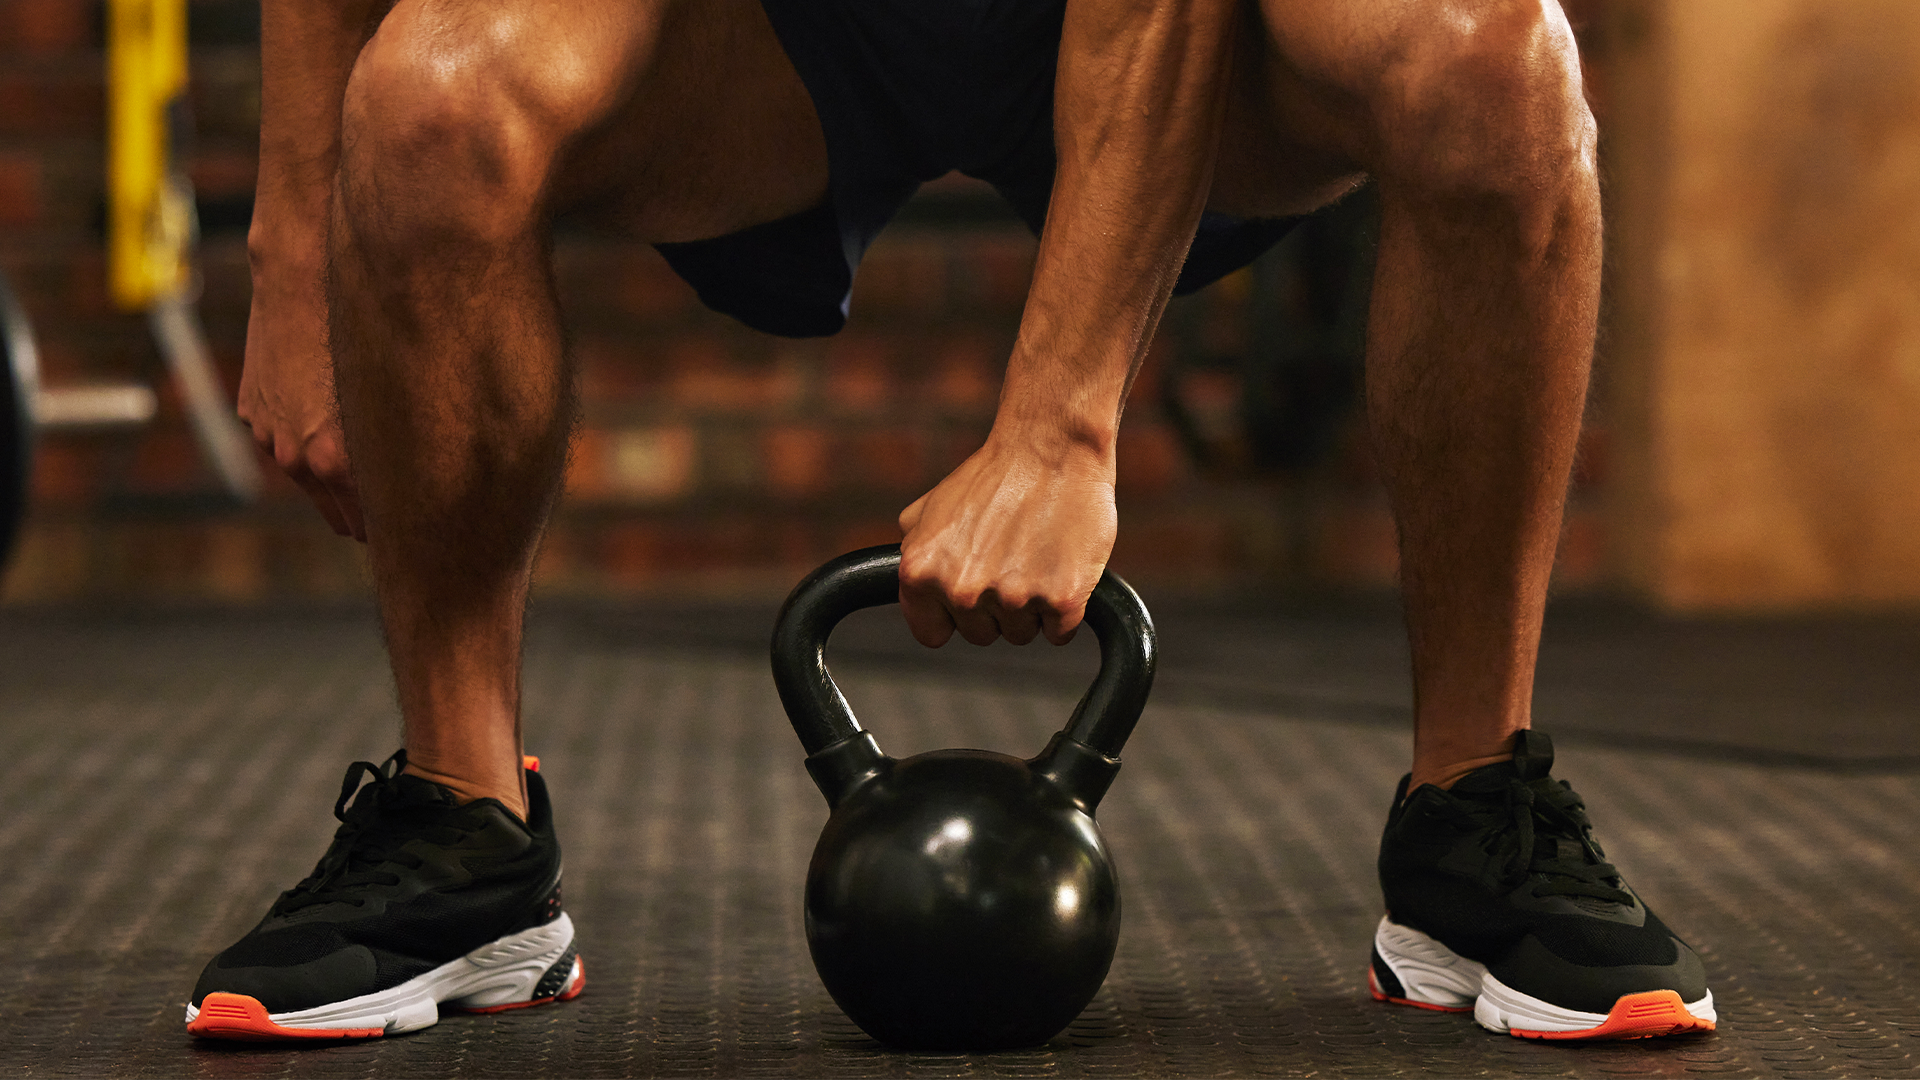 How to create your muscle-building workout routine